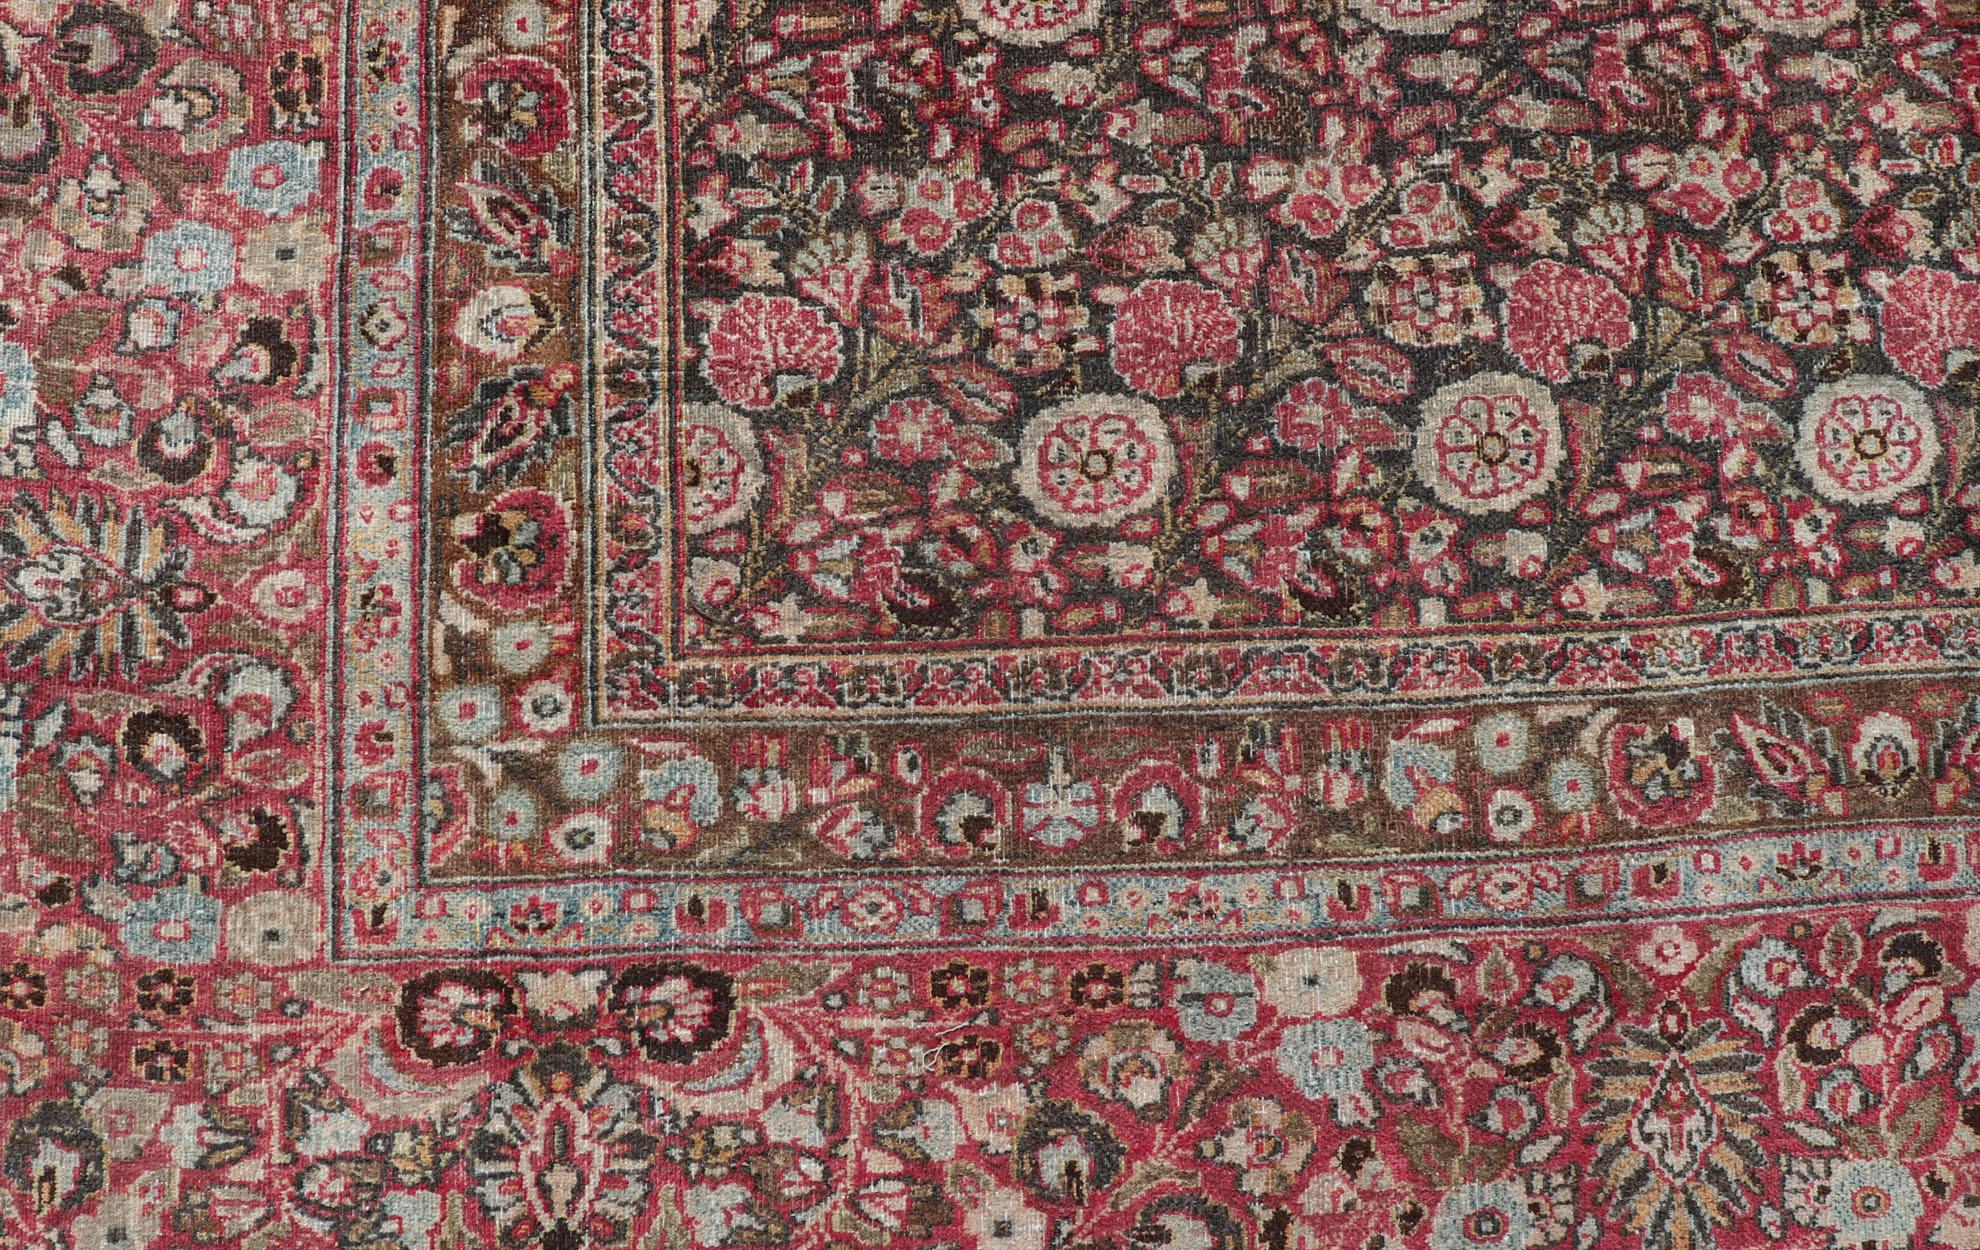 Antique Persian Khorasan Rug with Floral Design in Charcoal, Brown & Rose Red For Sale 7